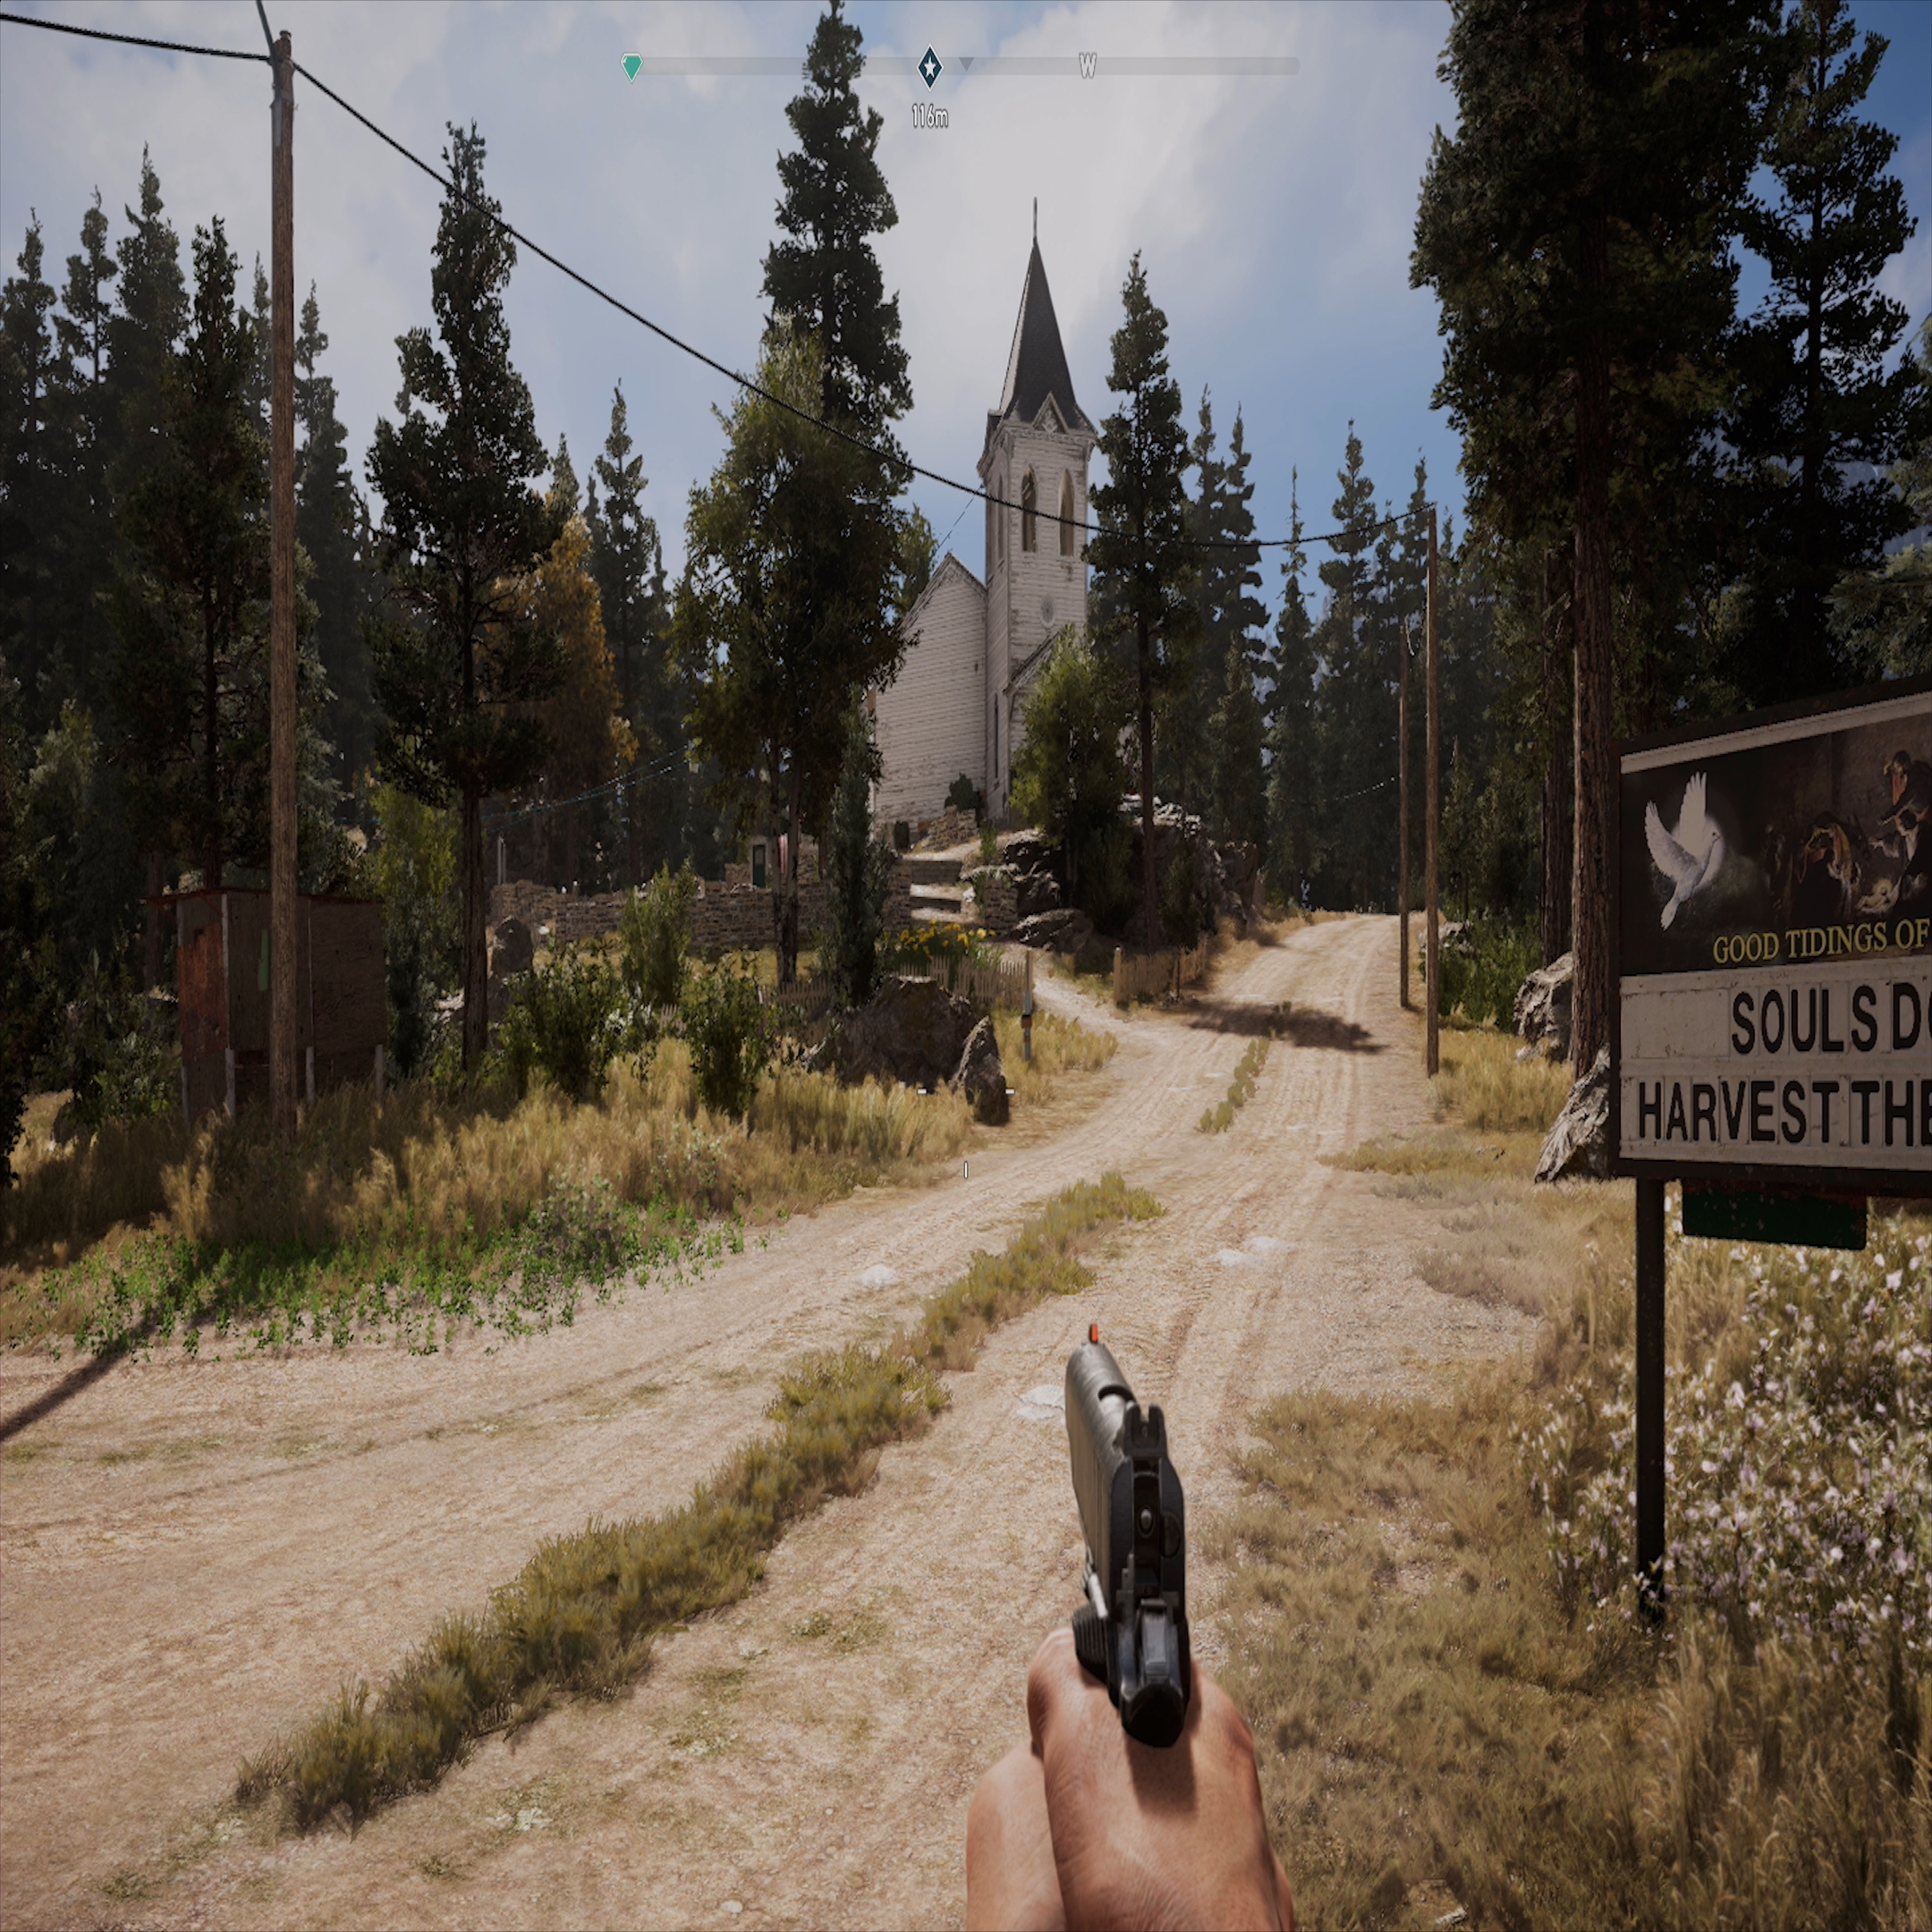 Far Cry 5 is XS optimized but doesn't show the need to transfer